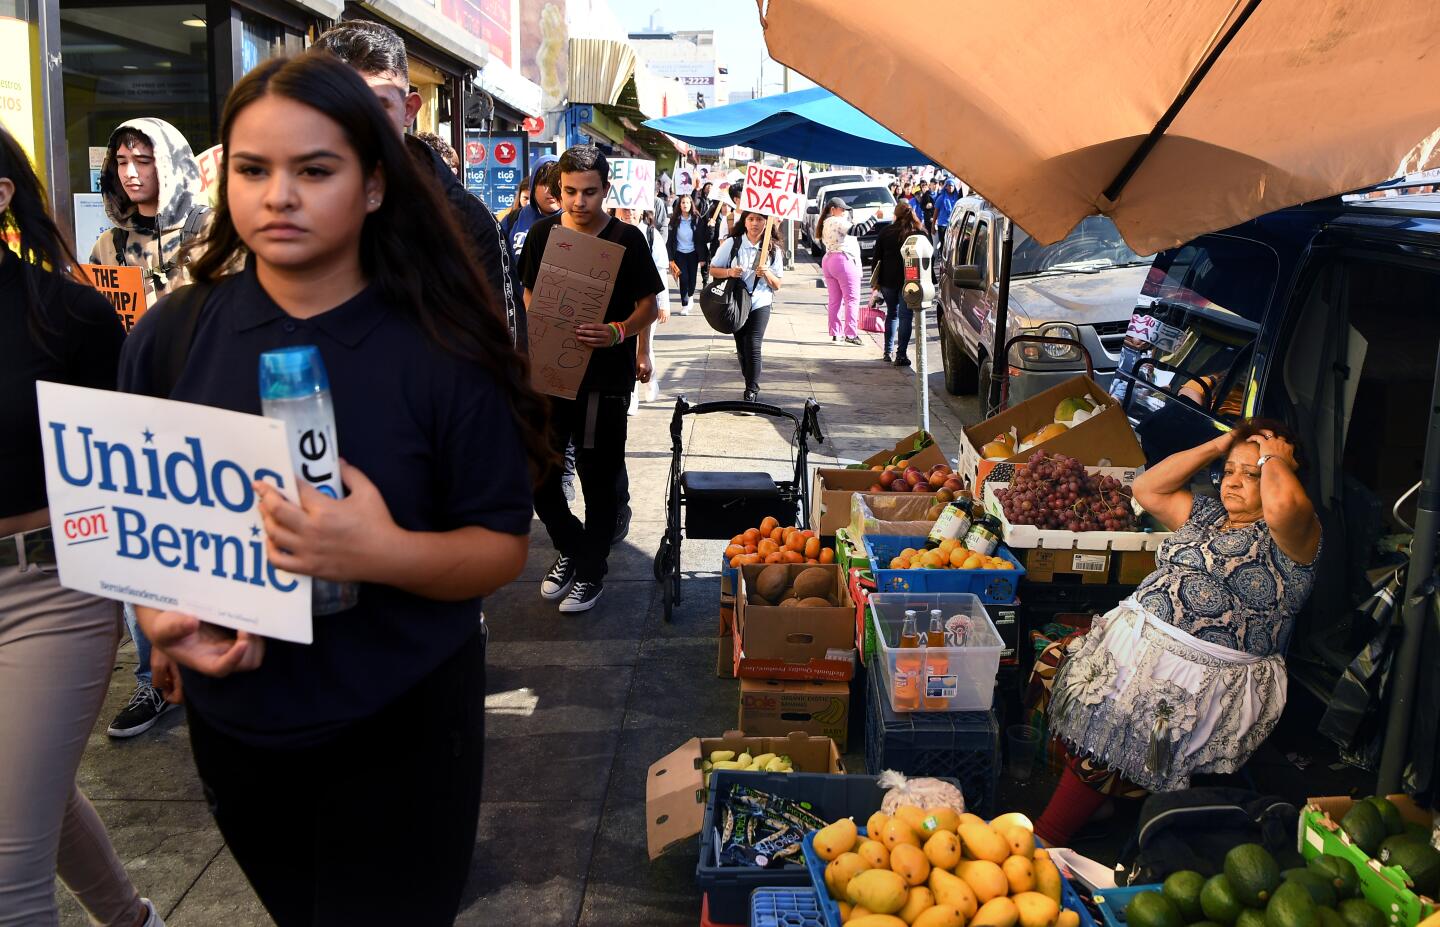 A street vendor selling fruit watches as DACA supporters march down 7th St. in Los Angeles .